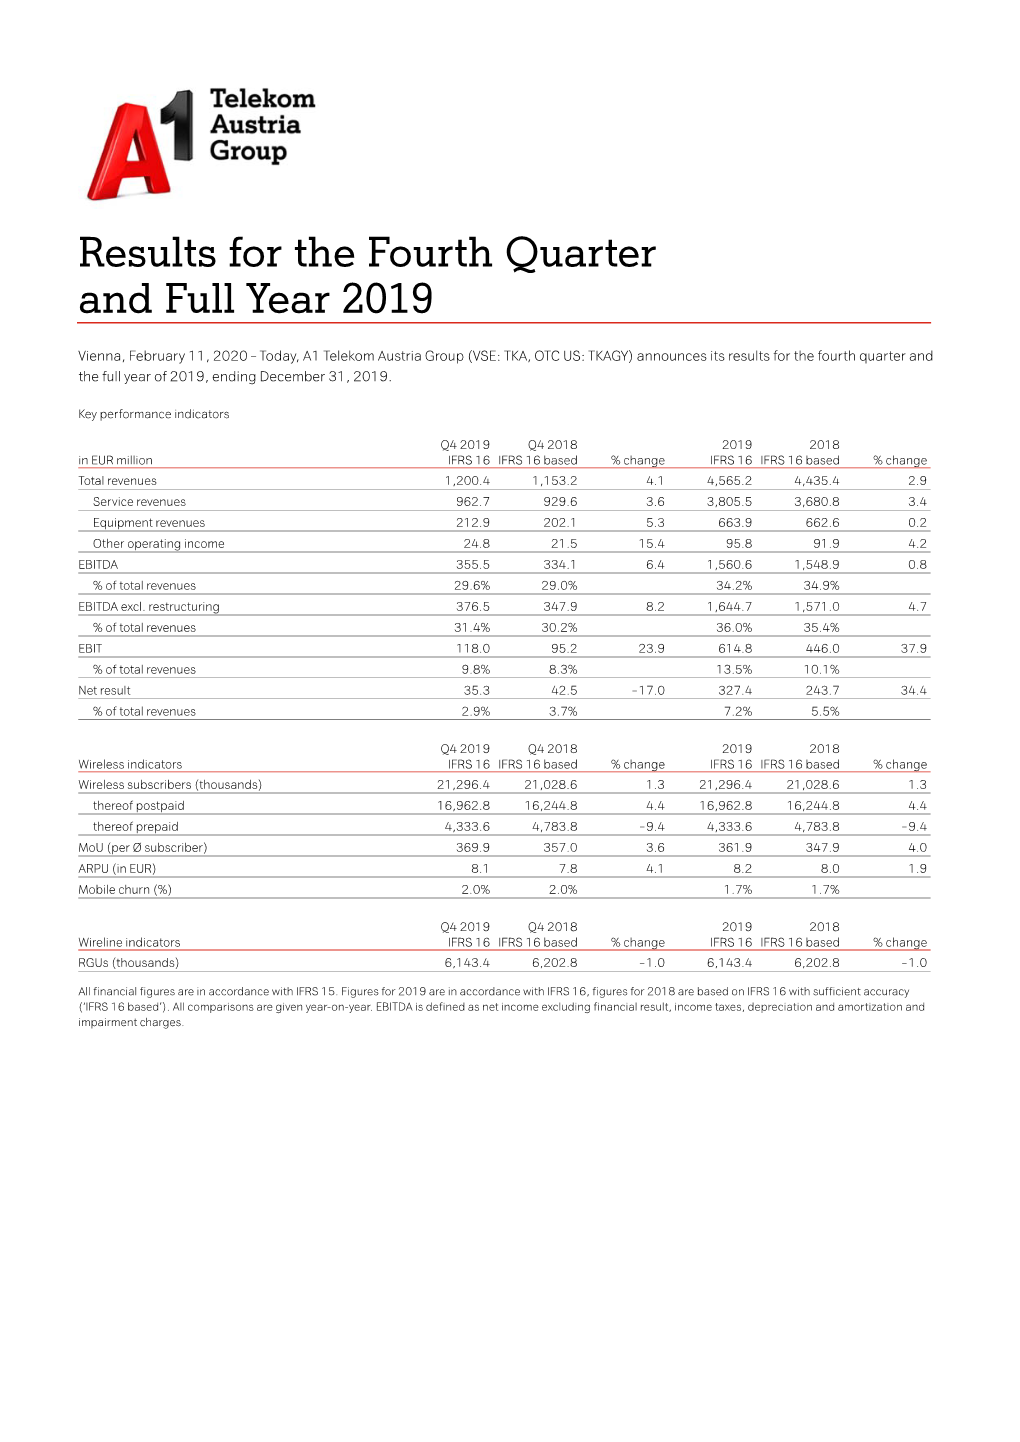 Results for the Fourth Quarter and Full Year 2019